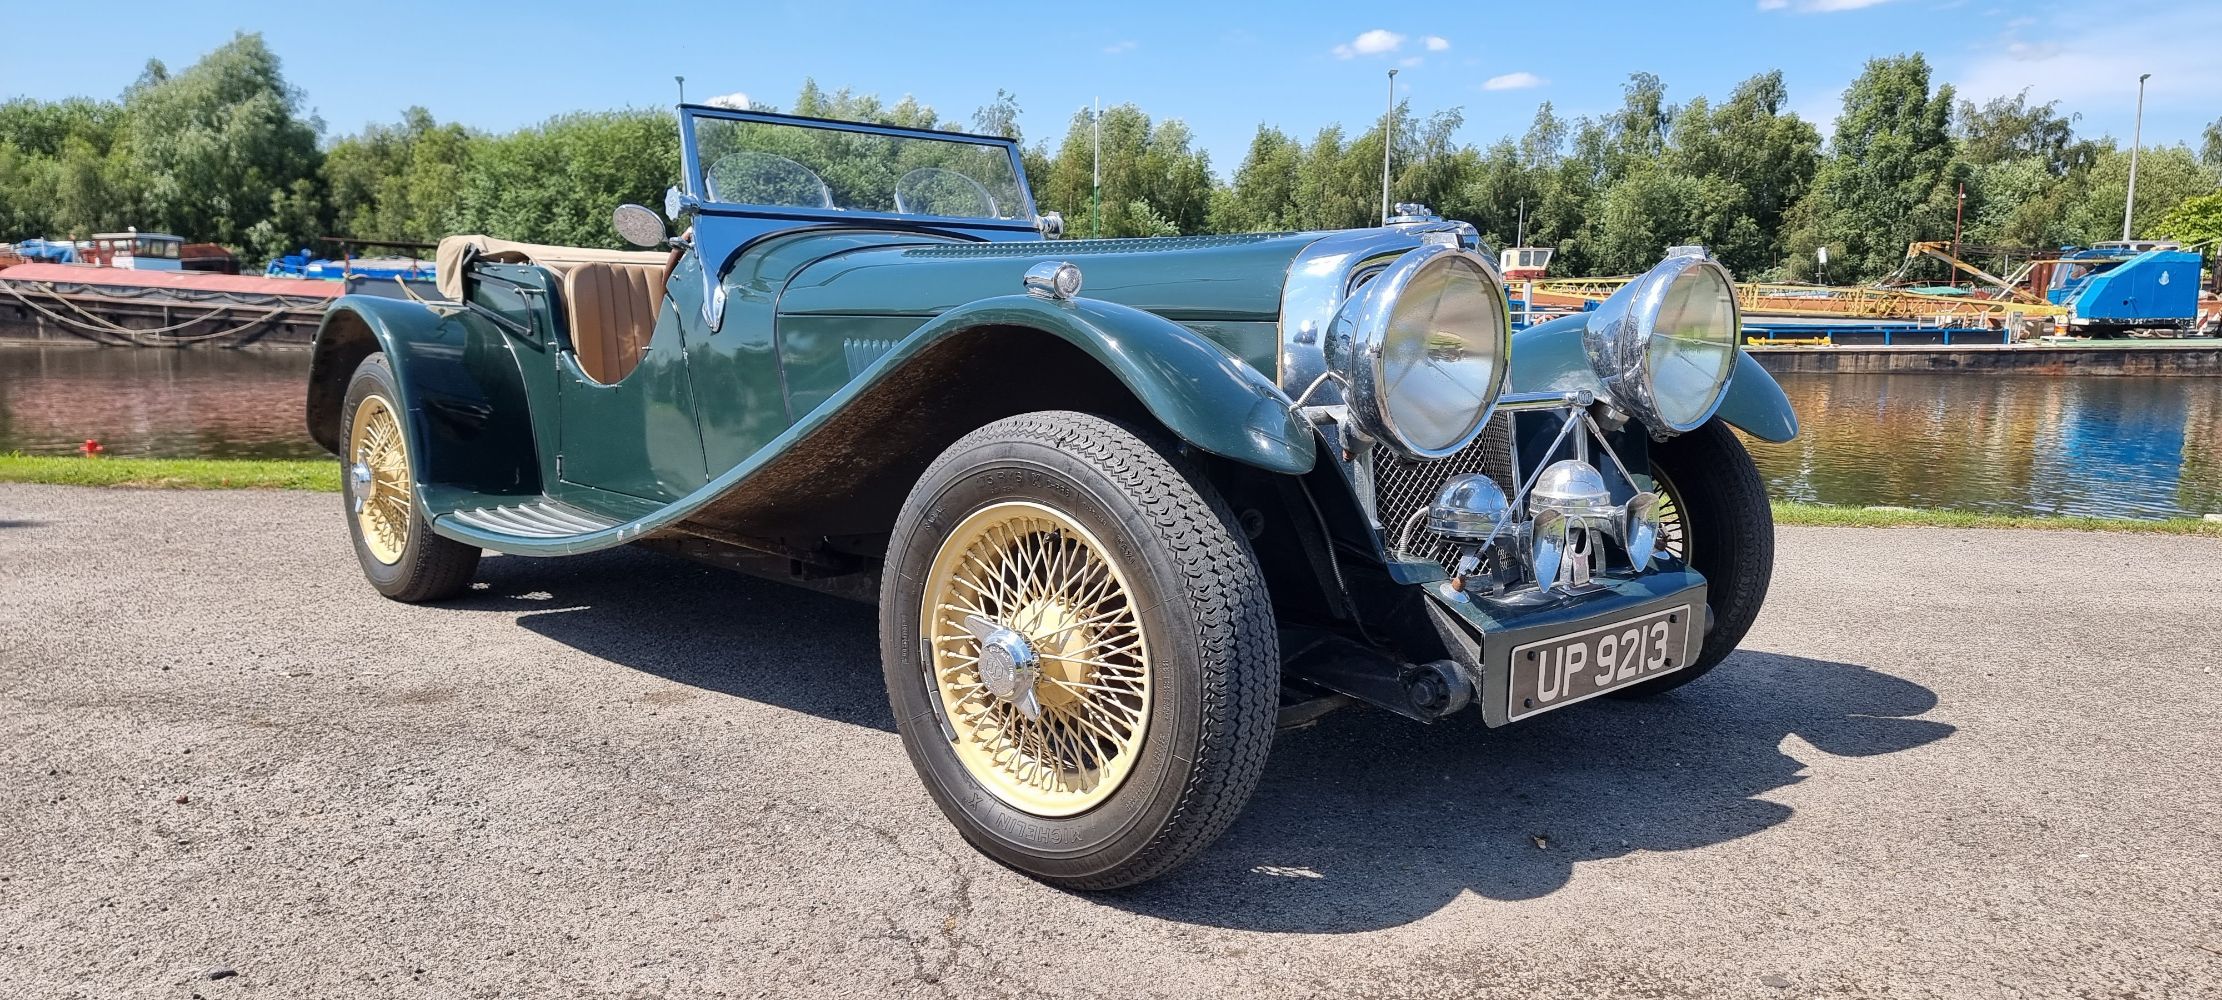 Autumn Classics, Cars and Motorcycles Auction - registration and bidding now open